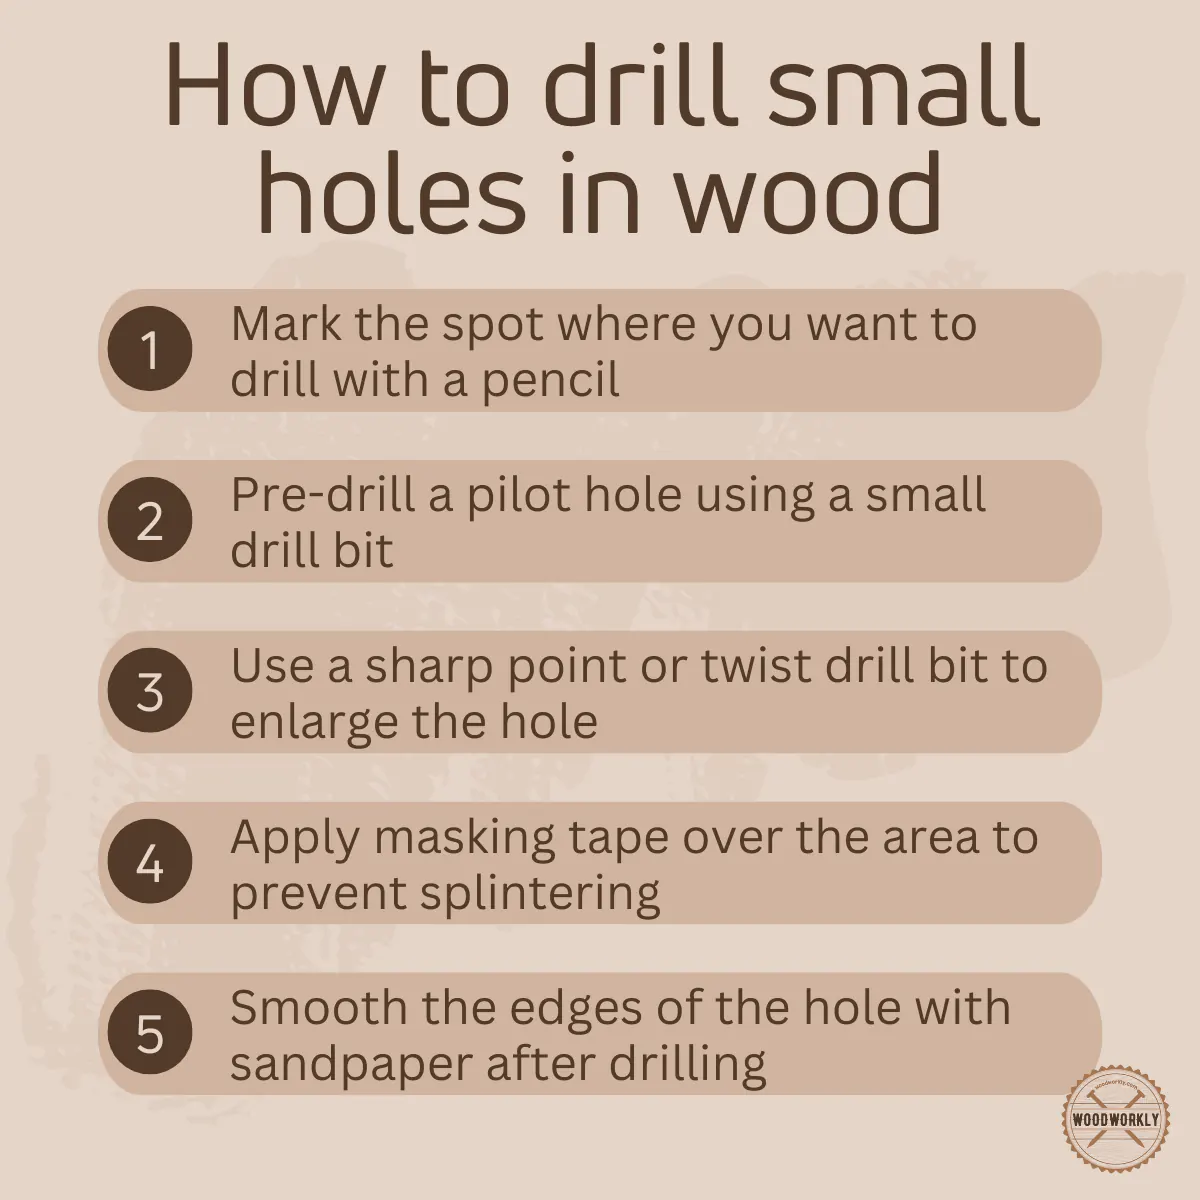 How to drill small holes in wood